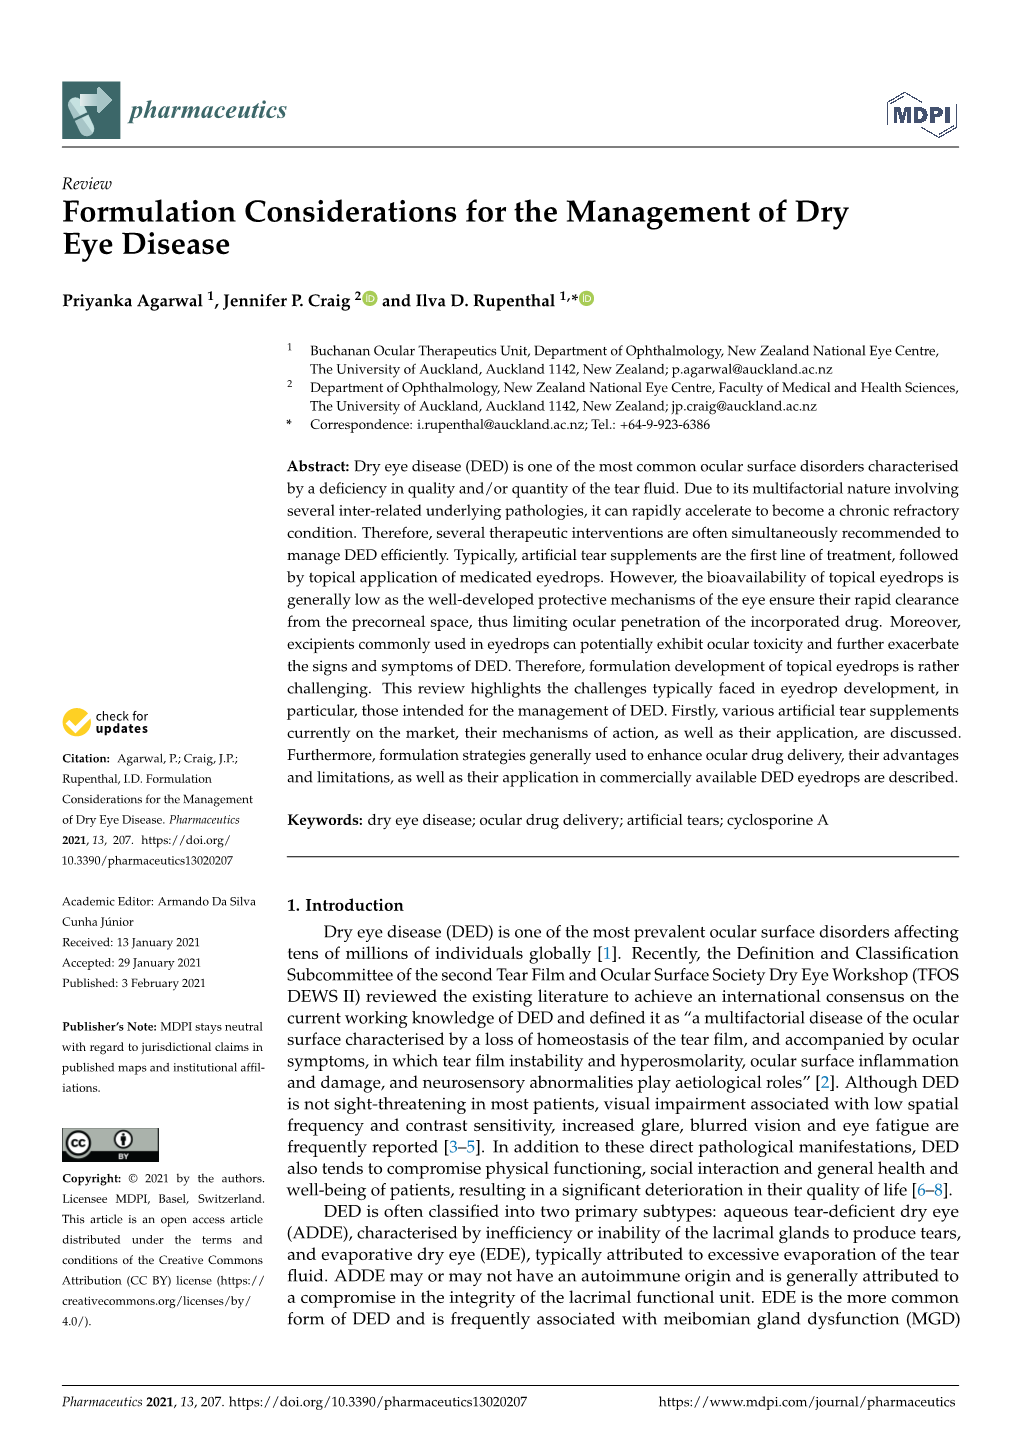 Formulation Considerations for the Management of Dry Eye Disease